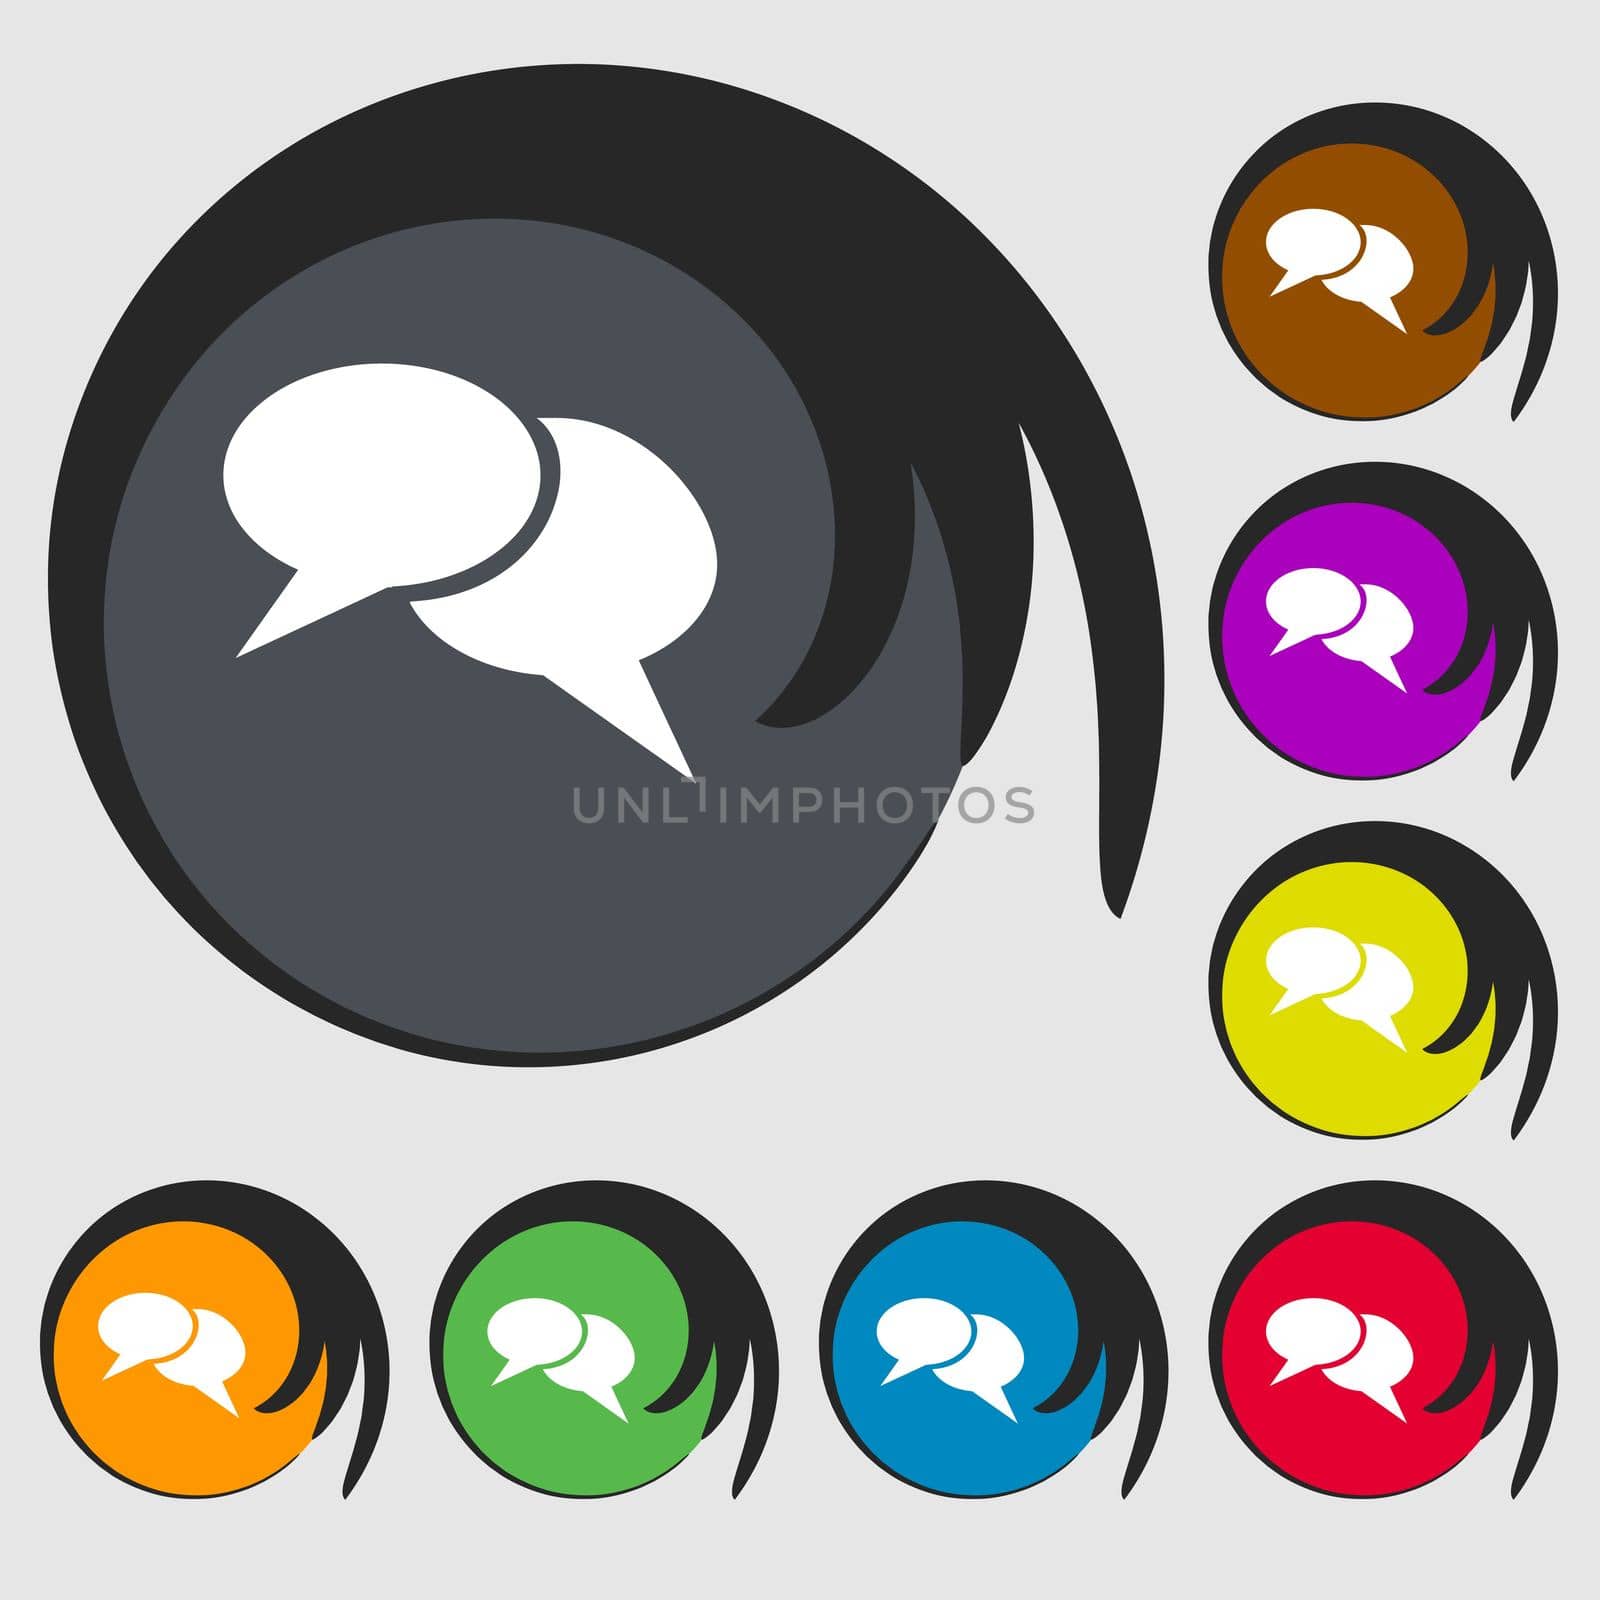 Speech bubble icons. Think cloud symbols. Symbols on eight colored buttons. illustration